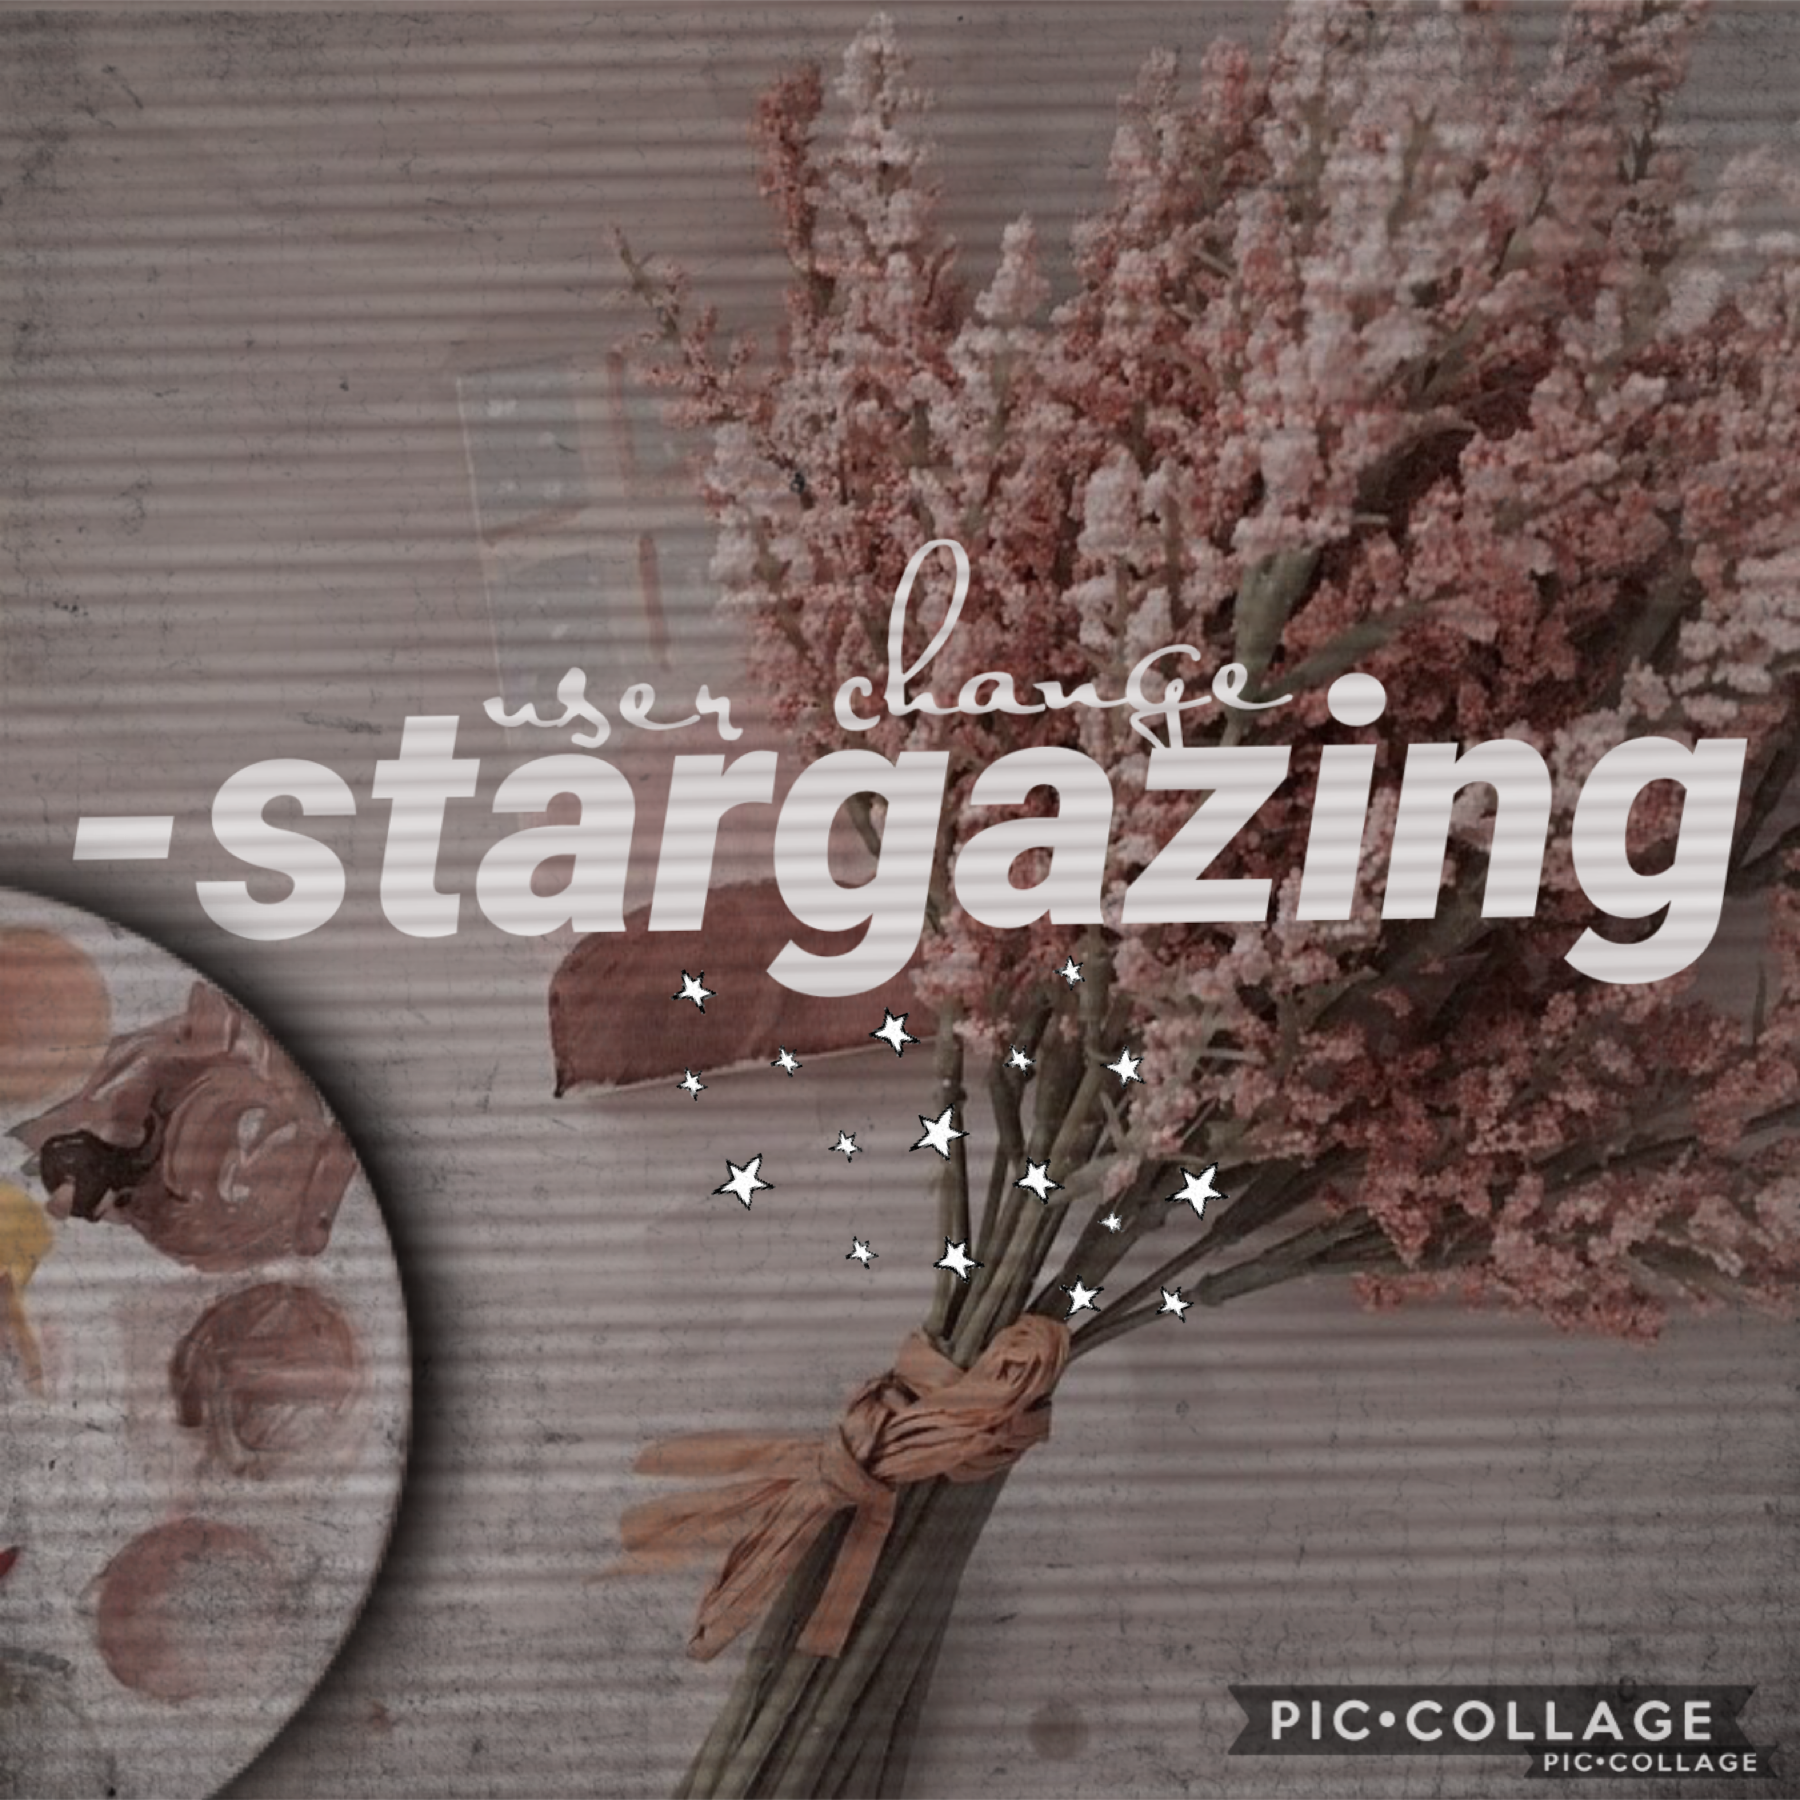 💫tap💫
That’s right folks!💫 cing124 is OVER!💫 From now on, she will be known as -stargazing!💫 Hope y’all like the new user!💫 -stargazing